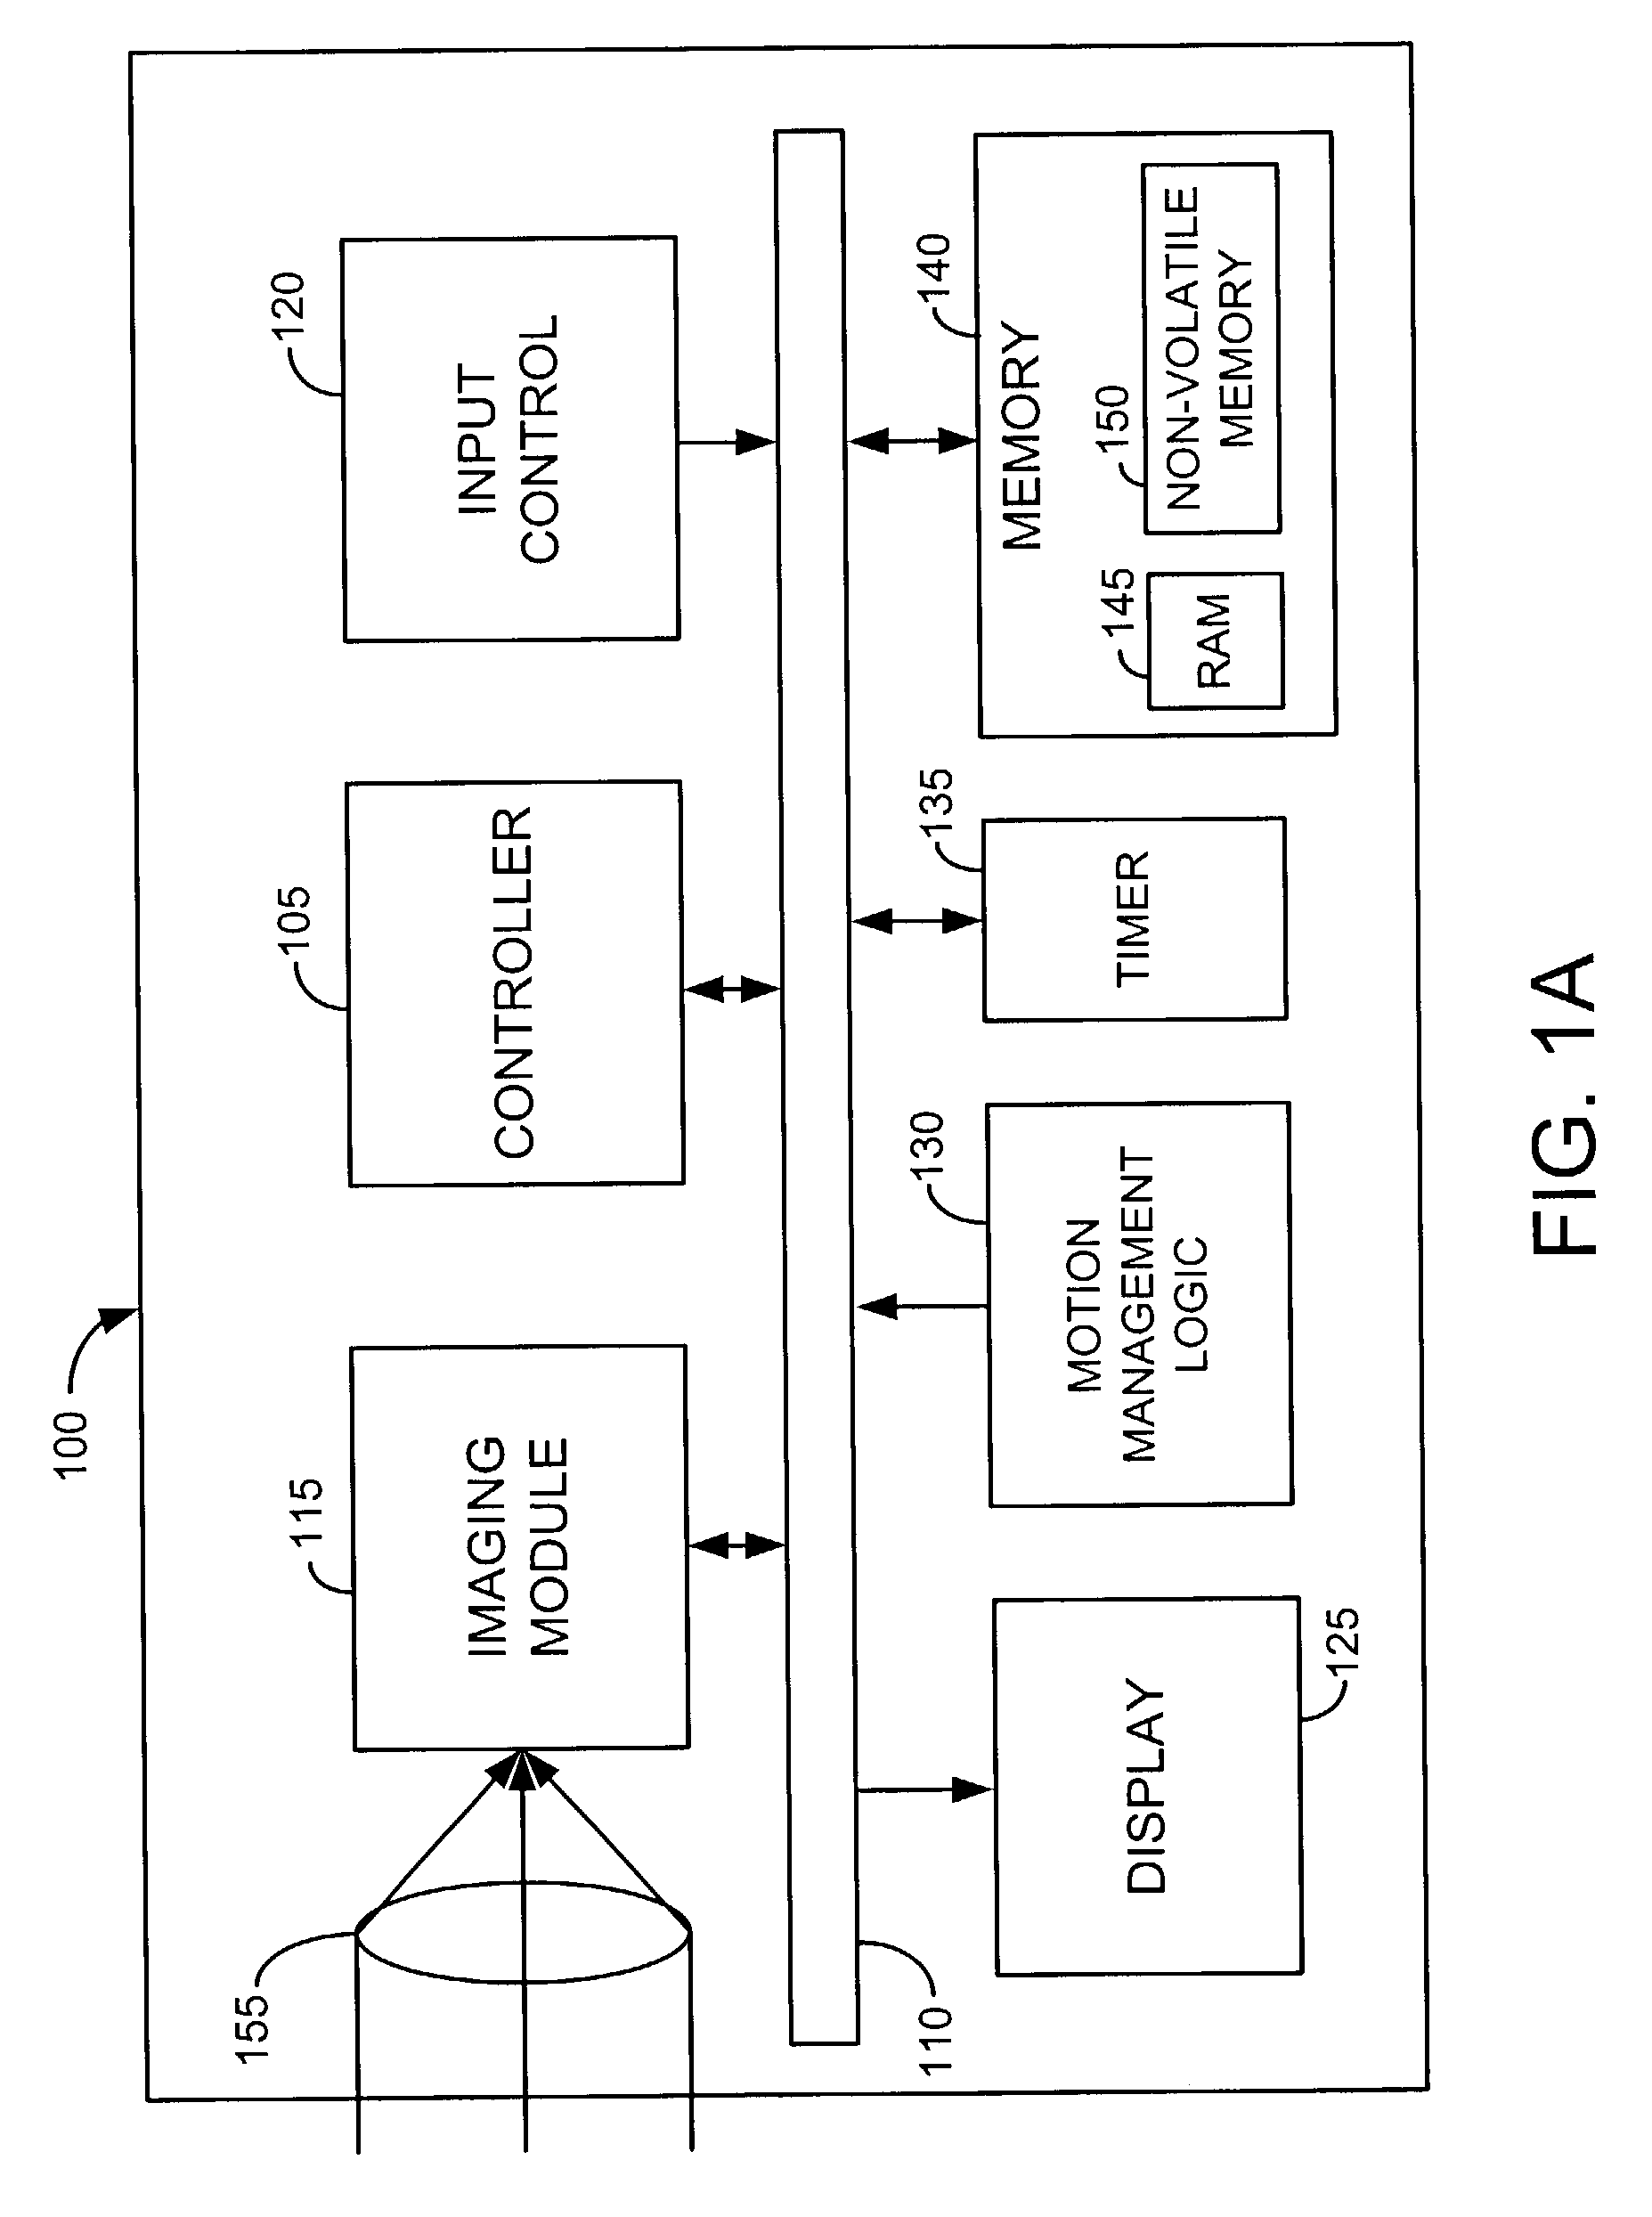 Digital camera having a motion tracking subsystem responsive to input control for tracking motion of the digital camera